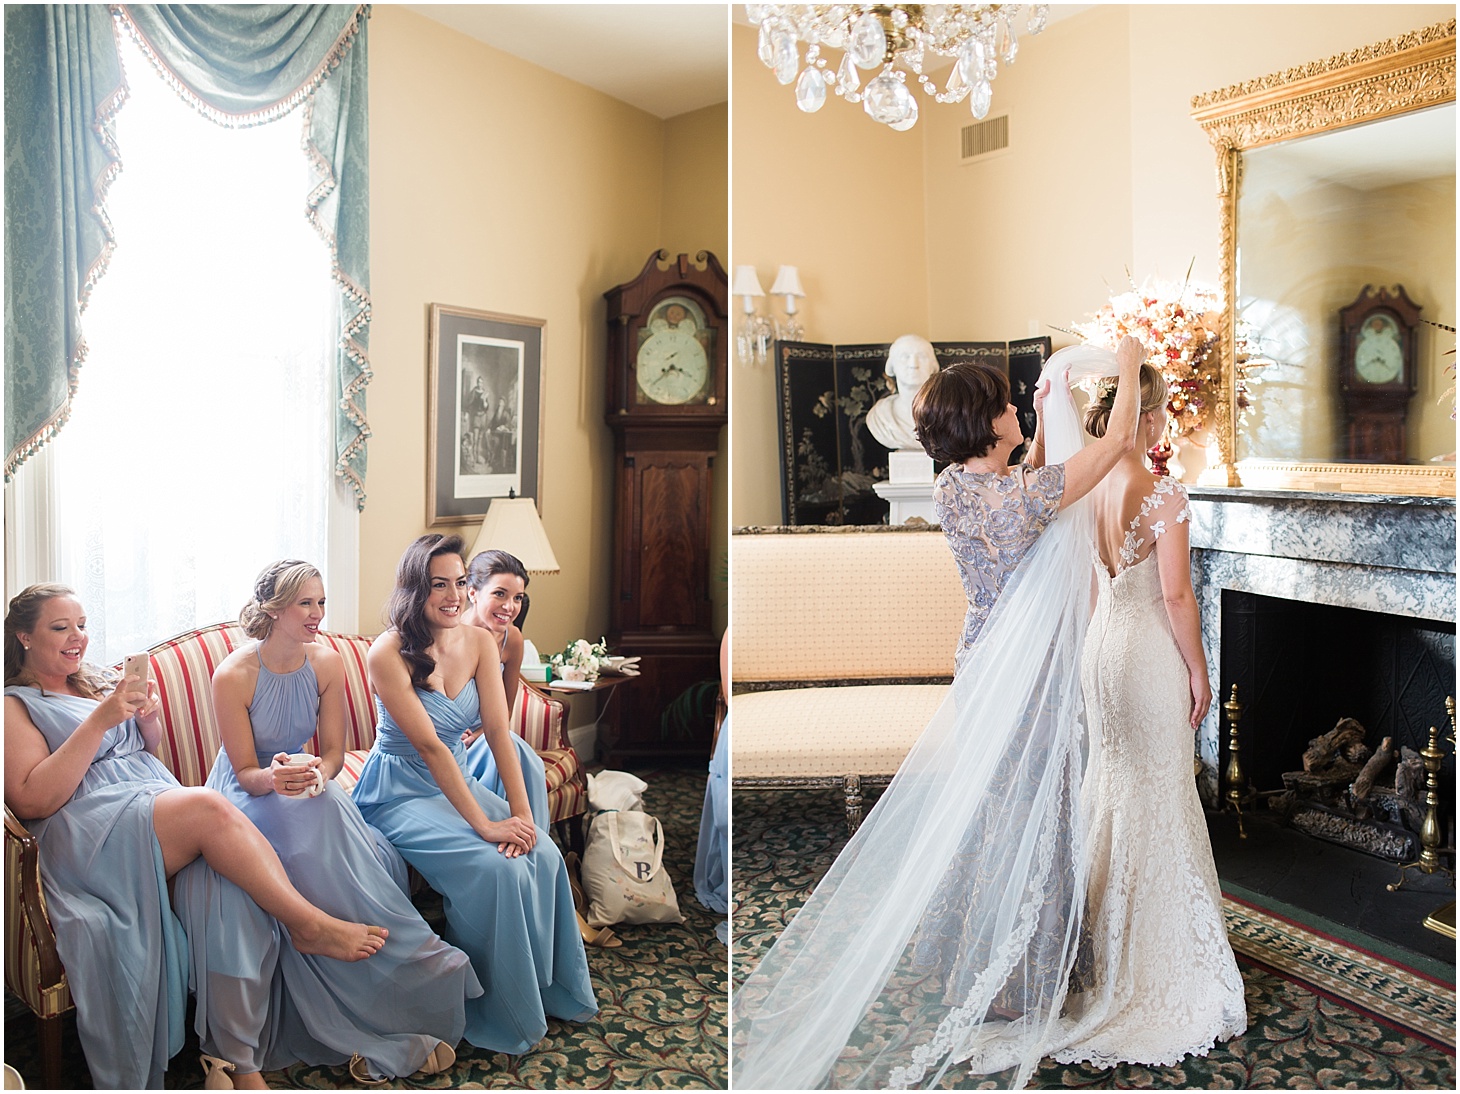 Bride Getting Ready before ceremony at Old Presbyterian Meeting House | Southern Black Tie wedding at St. Regis DC in Dusty Blue and Ivory | Sarah Bradshaw Photography